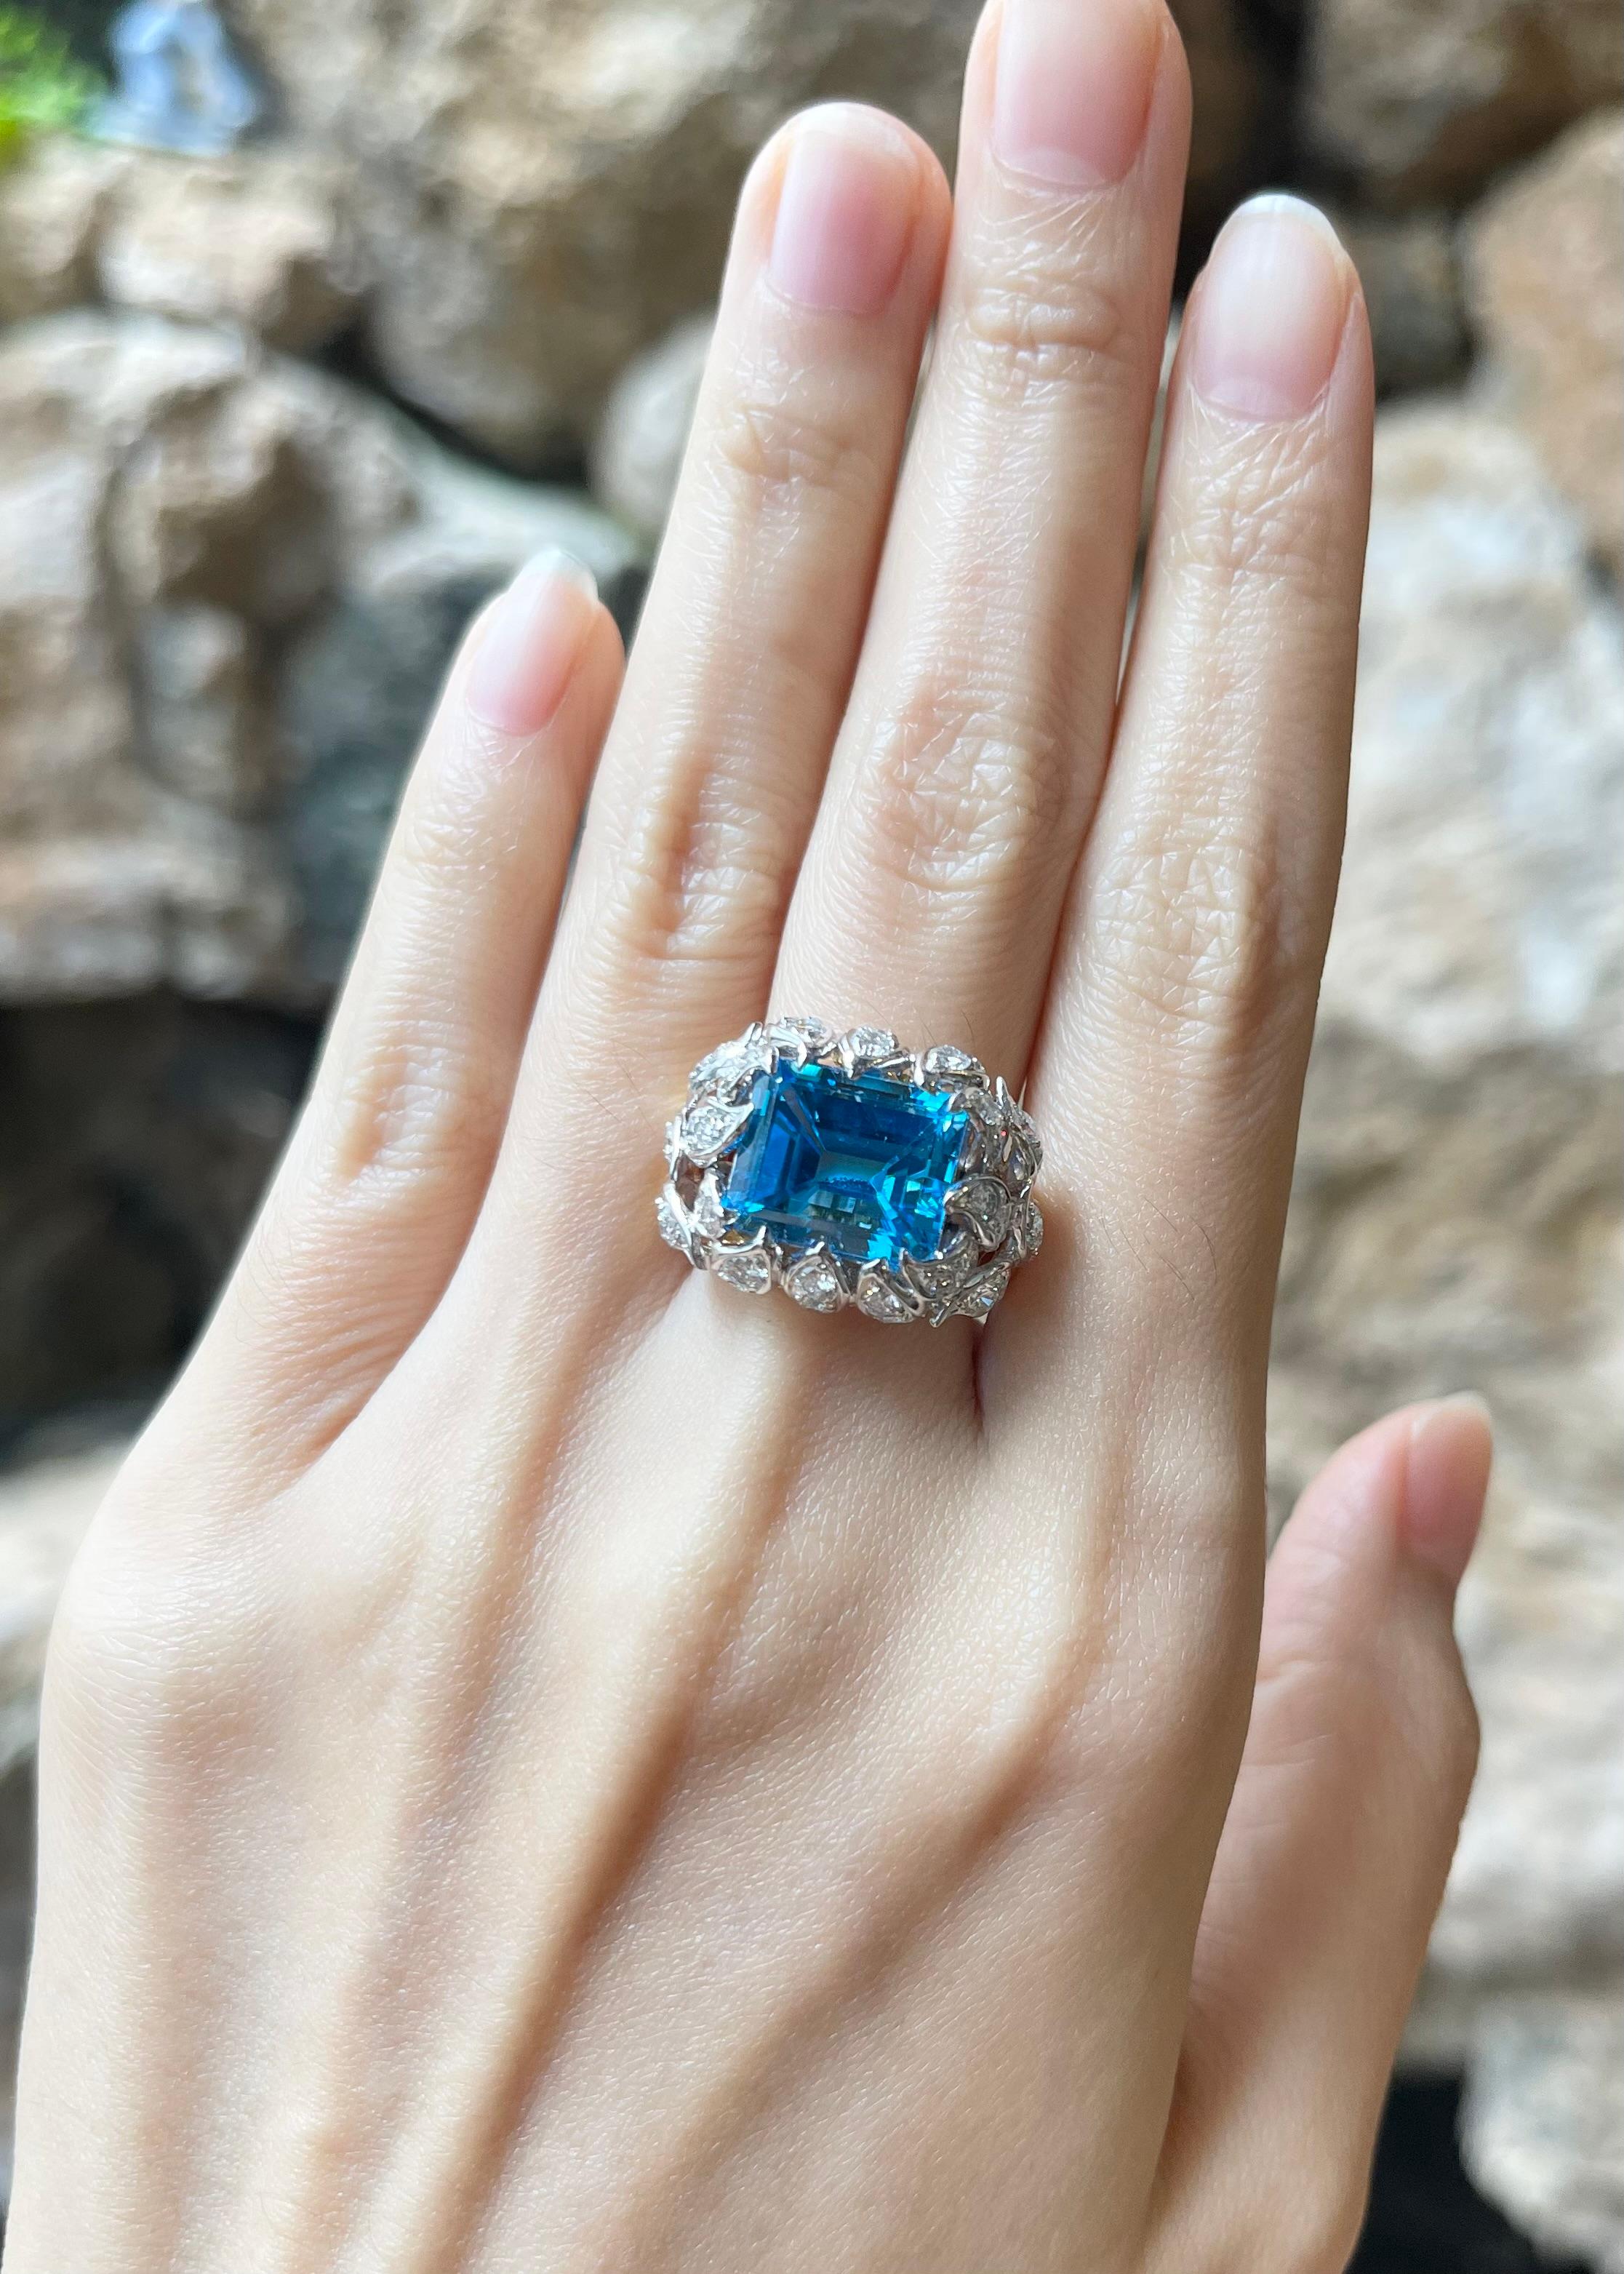 Blue Topaz 7.72 carats with Diamond 1.68 carats Ring set in 14K Gold Settings

Width:  2.2 cm 
Length: 1.6 cm
Ring Size: 56
Total Weight: 10.29 grams

